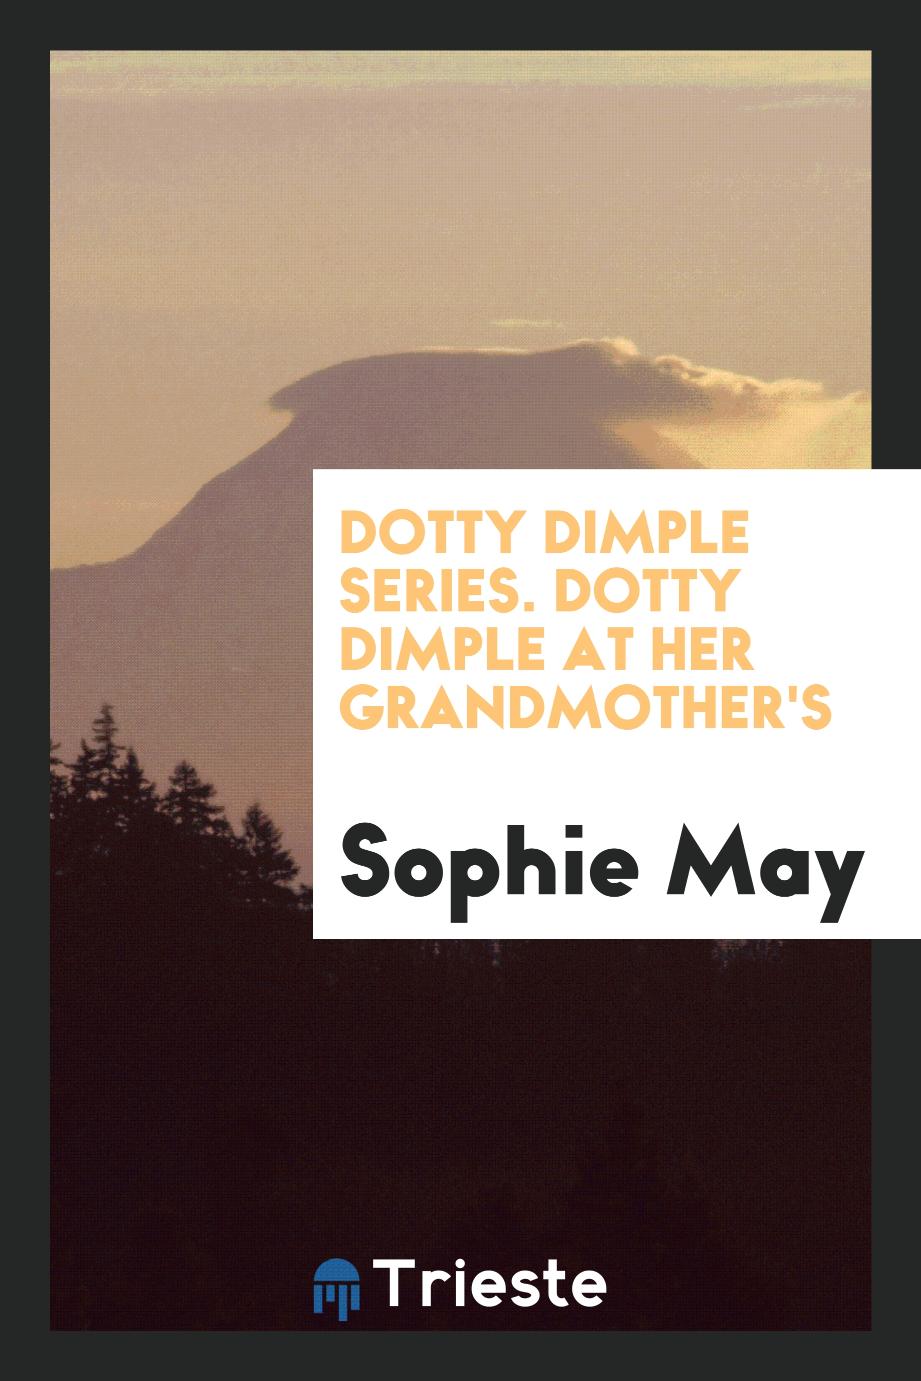 Dotty Dimple Series. Dotty Dimple at Her Grandmother's